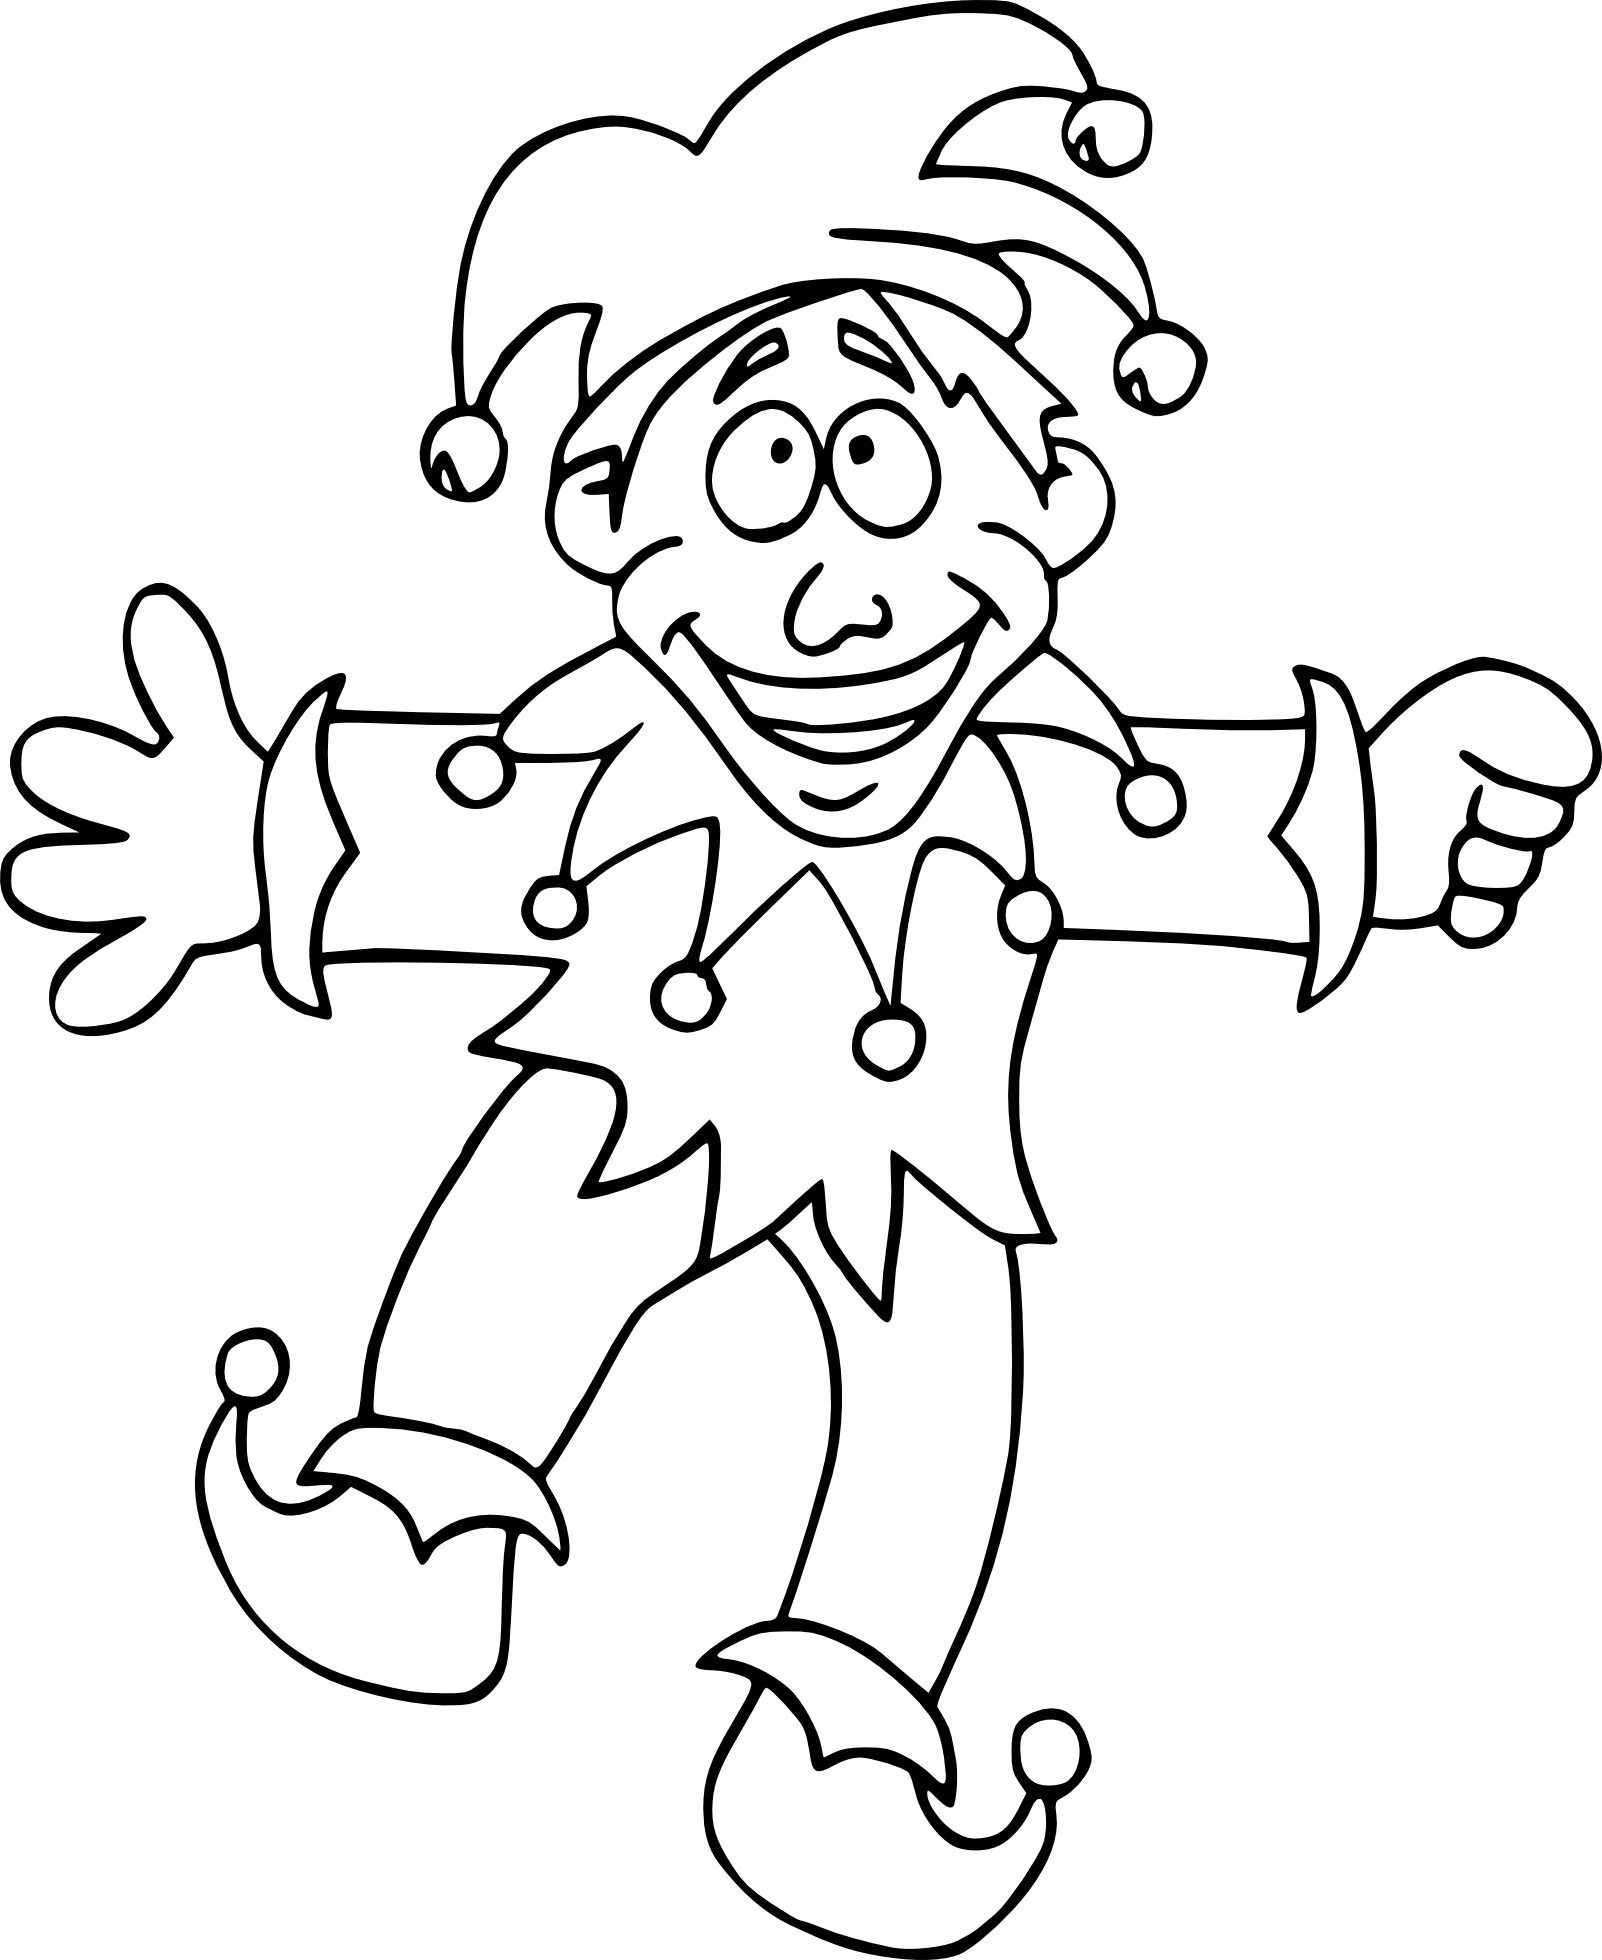 Wonderful jester coloring pages for kids